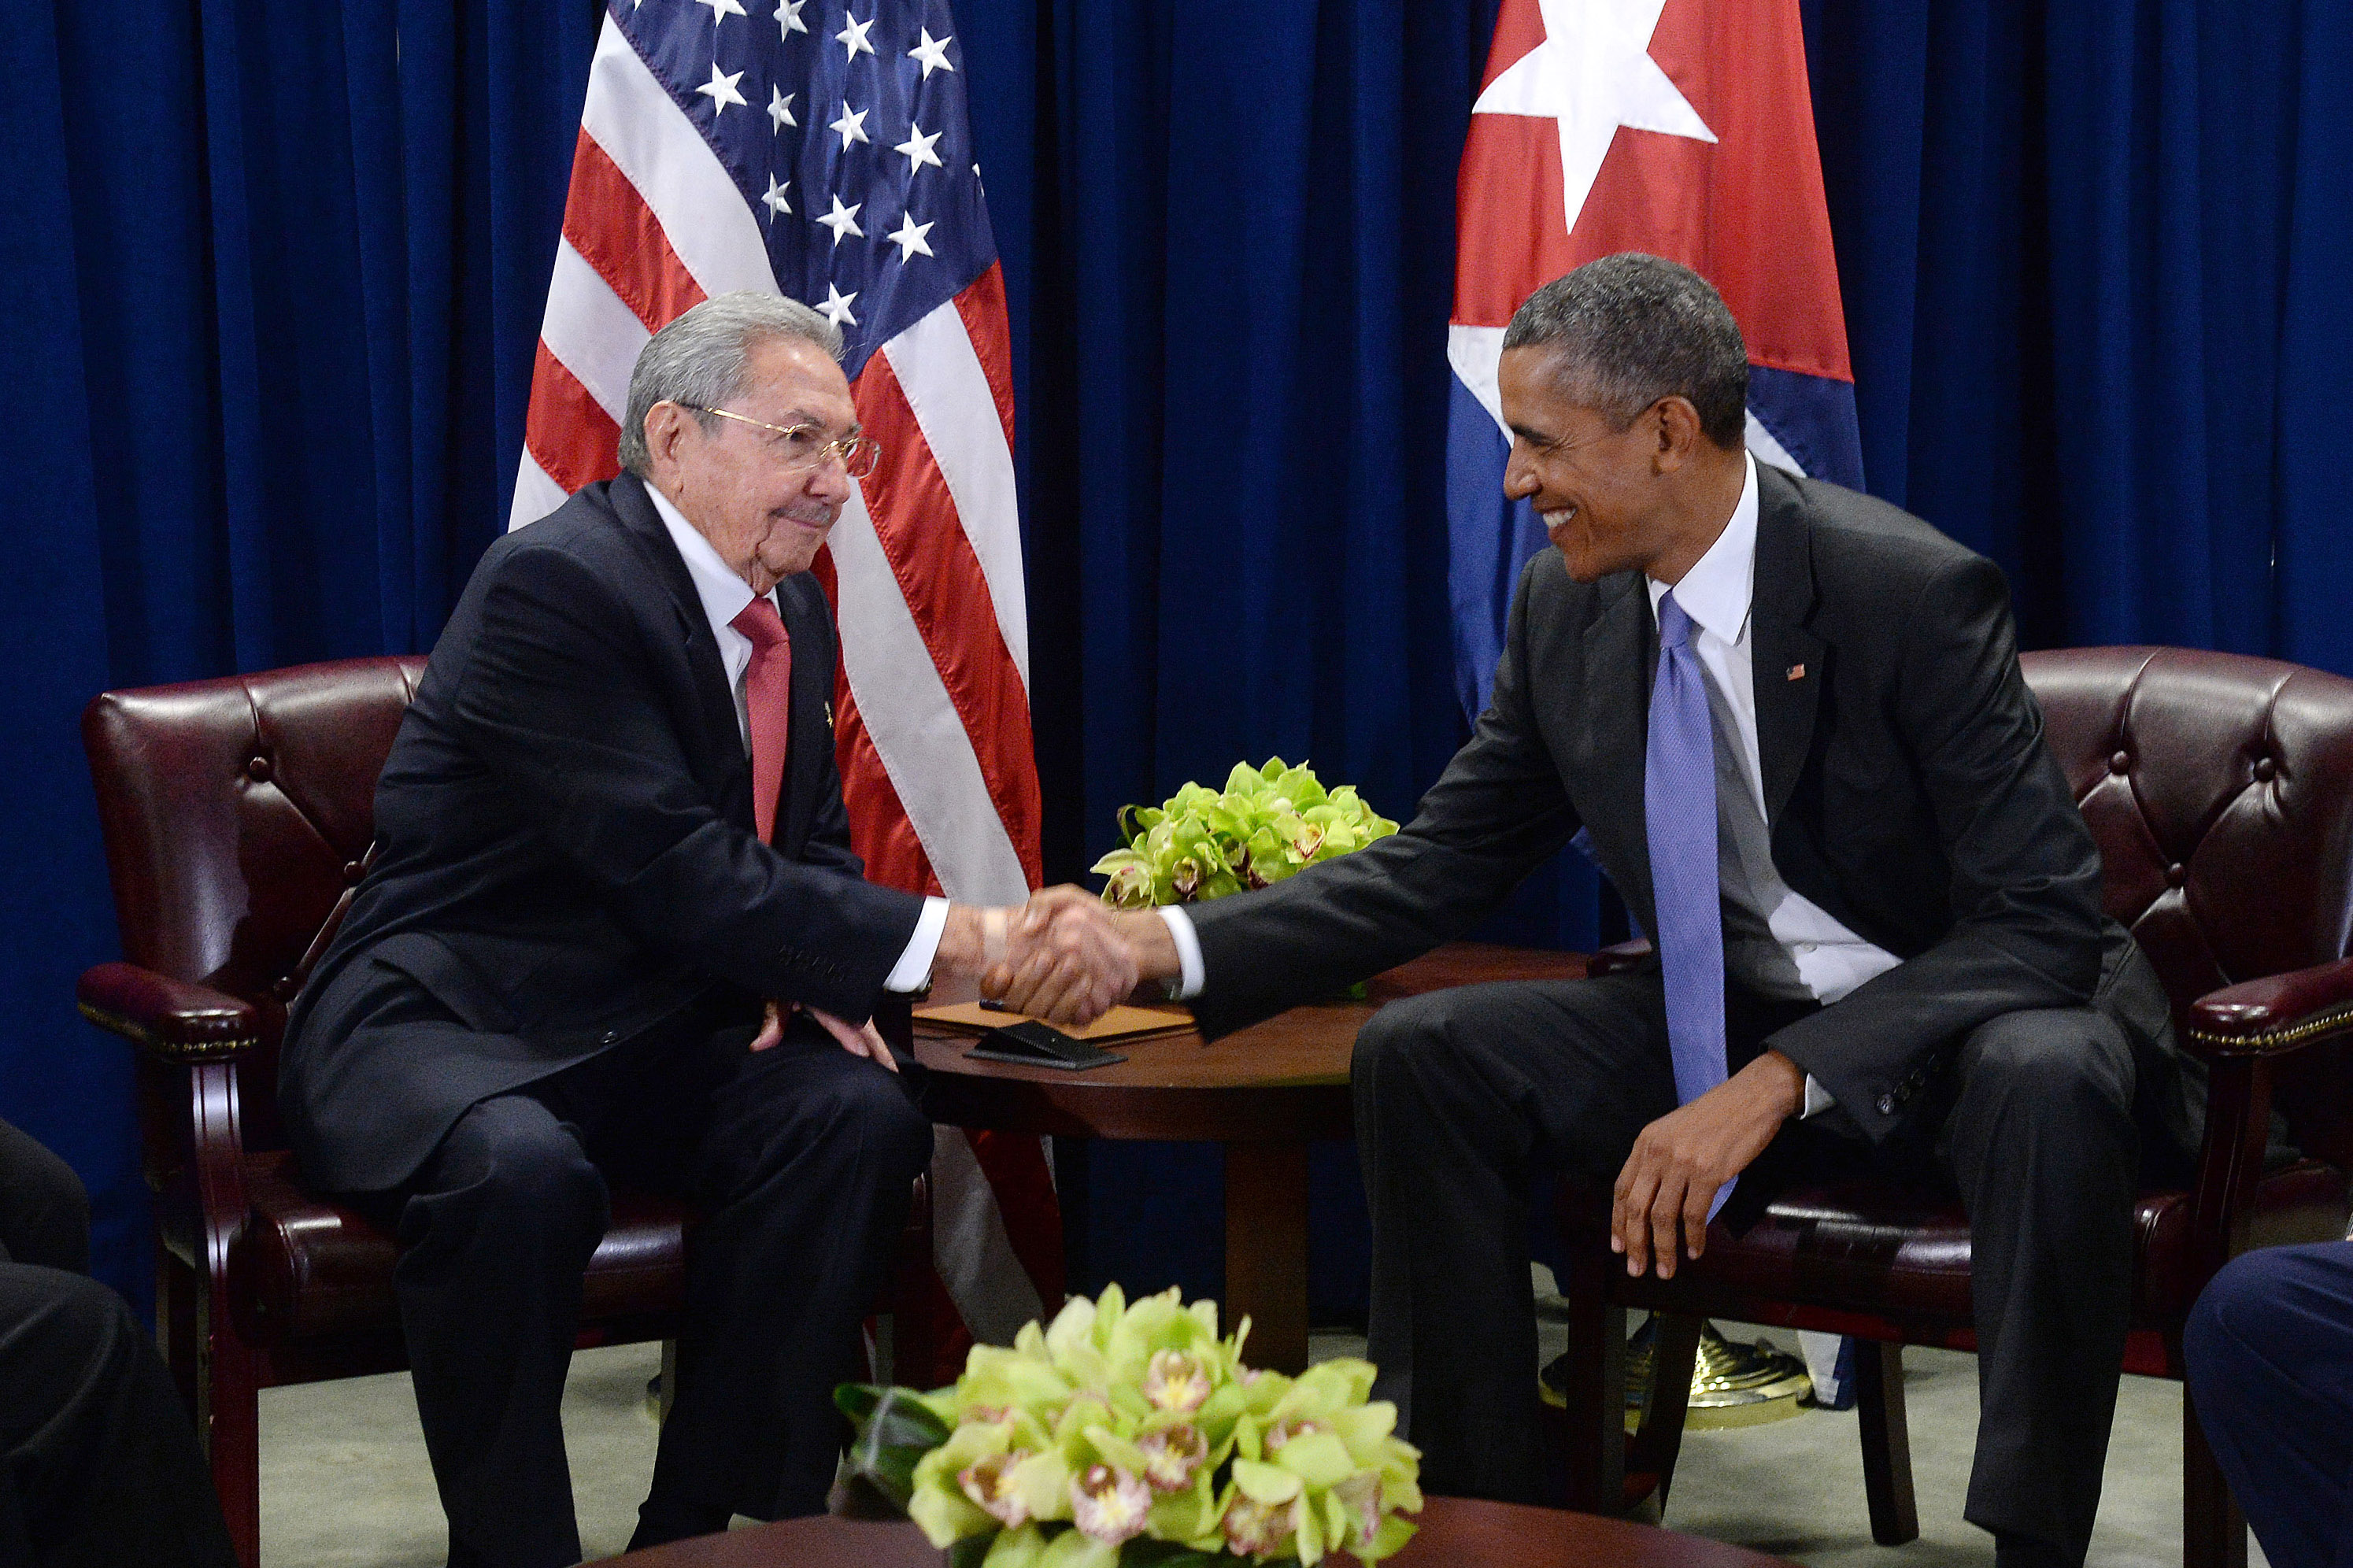 NEW YORK, NY - SEPTEMBER 29: U.S. President Barack Obama (R) and President Raul Castro (L) of Cuba shake hands during a bilateral meeting at the United Nations Headquarters on September 29, 2015 in New York City. Castro and Obama are in New York City to attend the 70th anniversary general assembly meetings. (Photo by Anthony Behar-Pool/Getty Images)